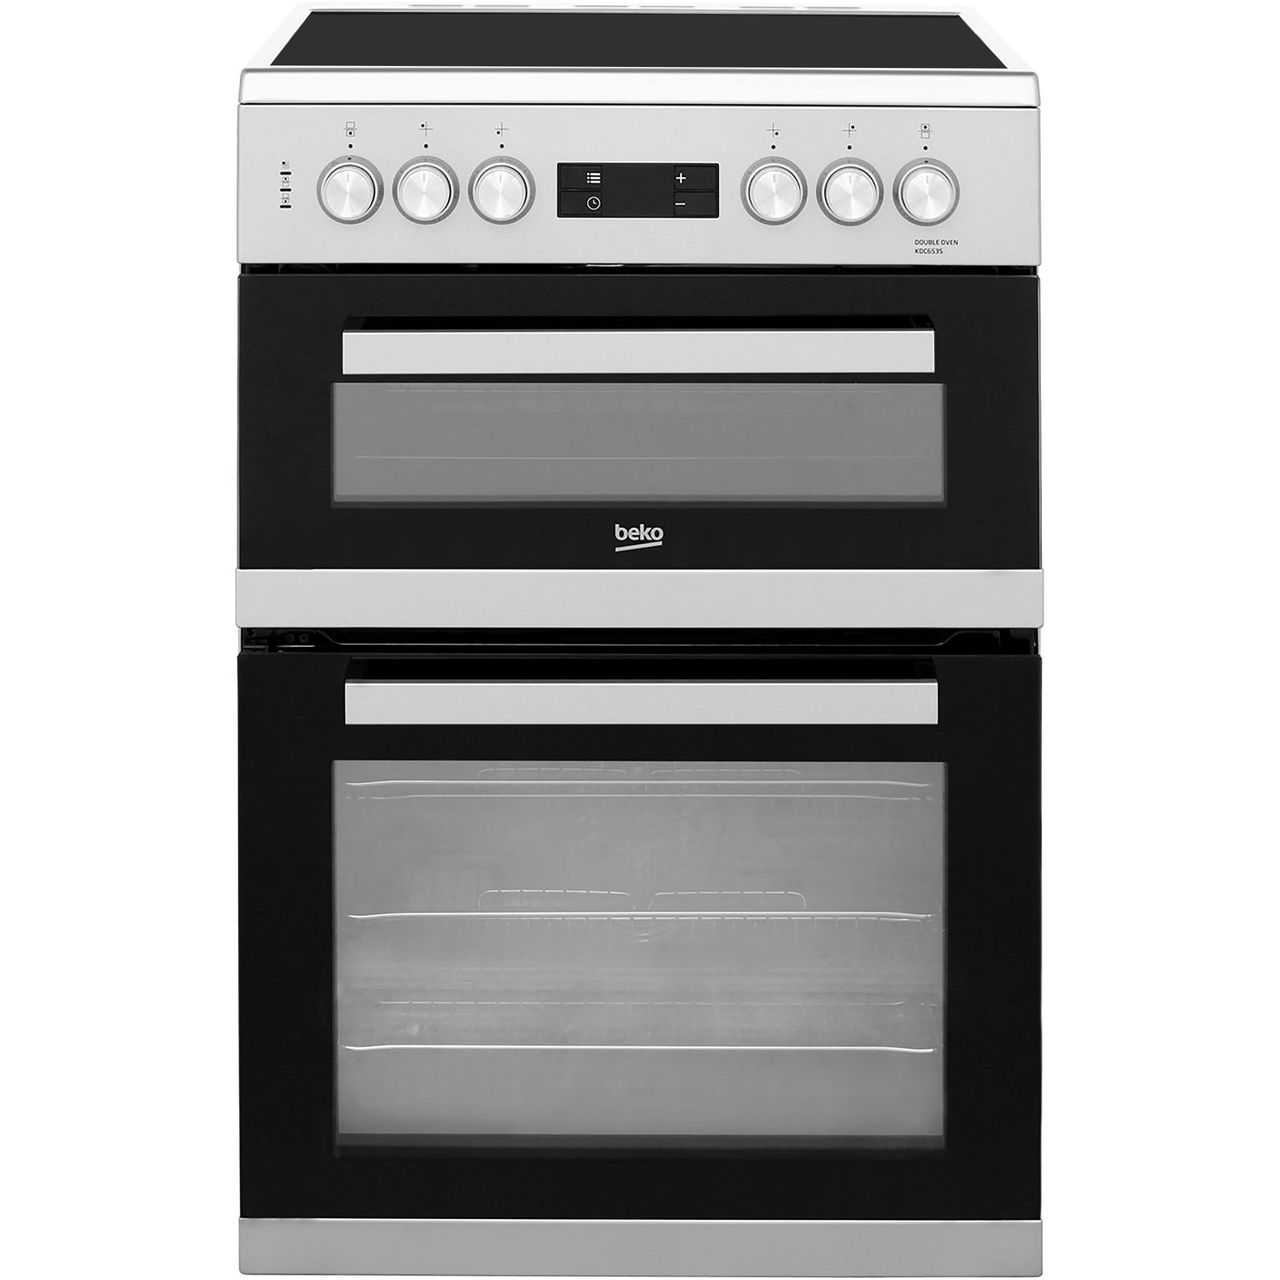 Beko KDC653S 60cm Electric Cooker with Ceramic Hob Review